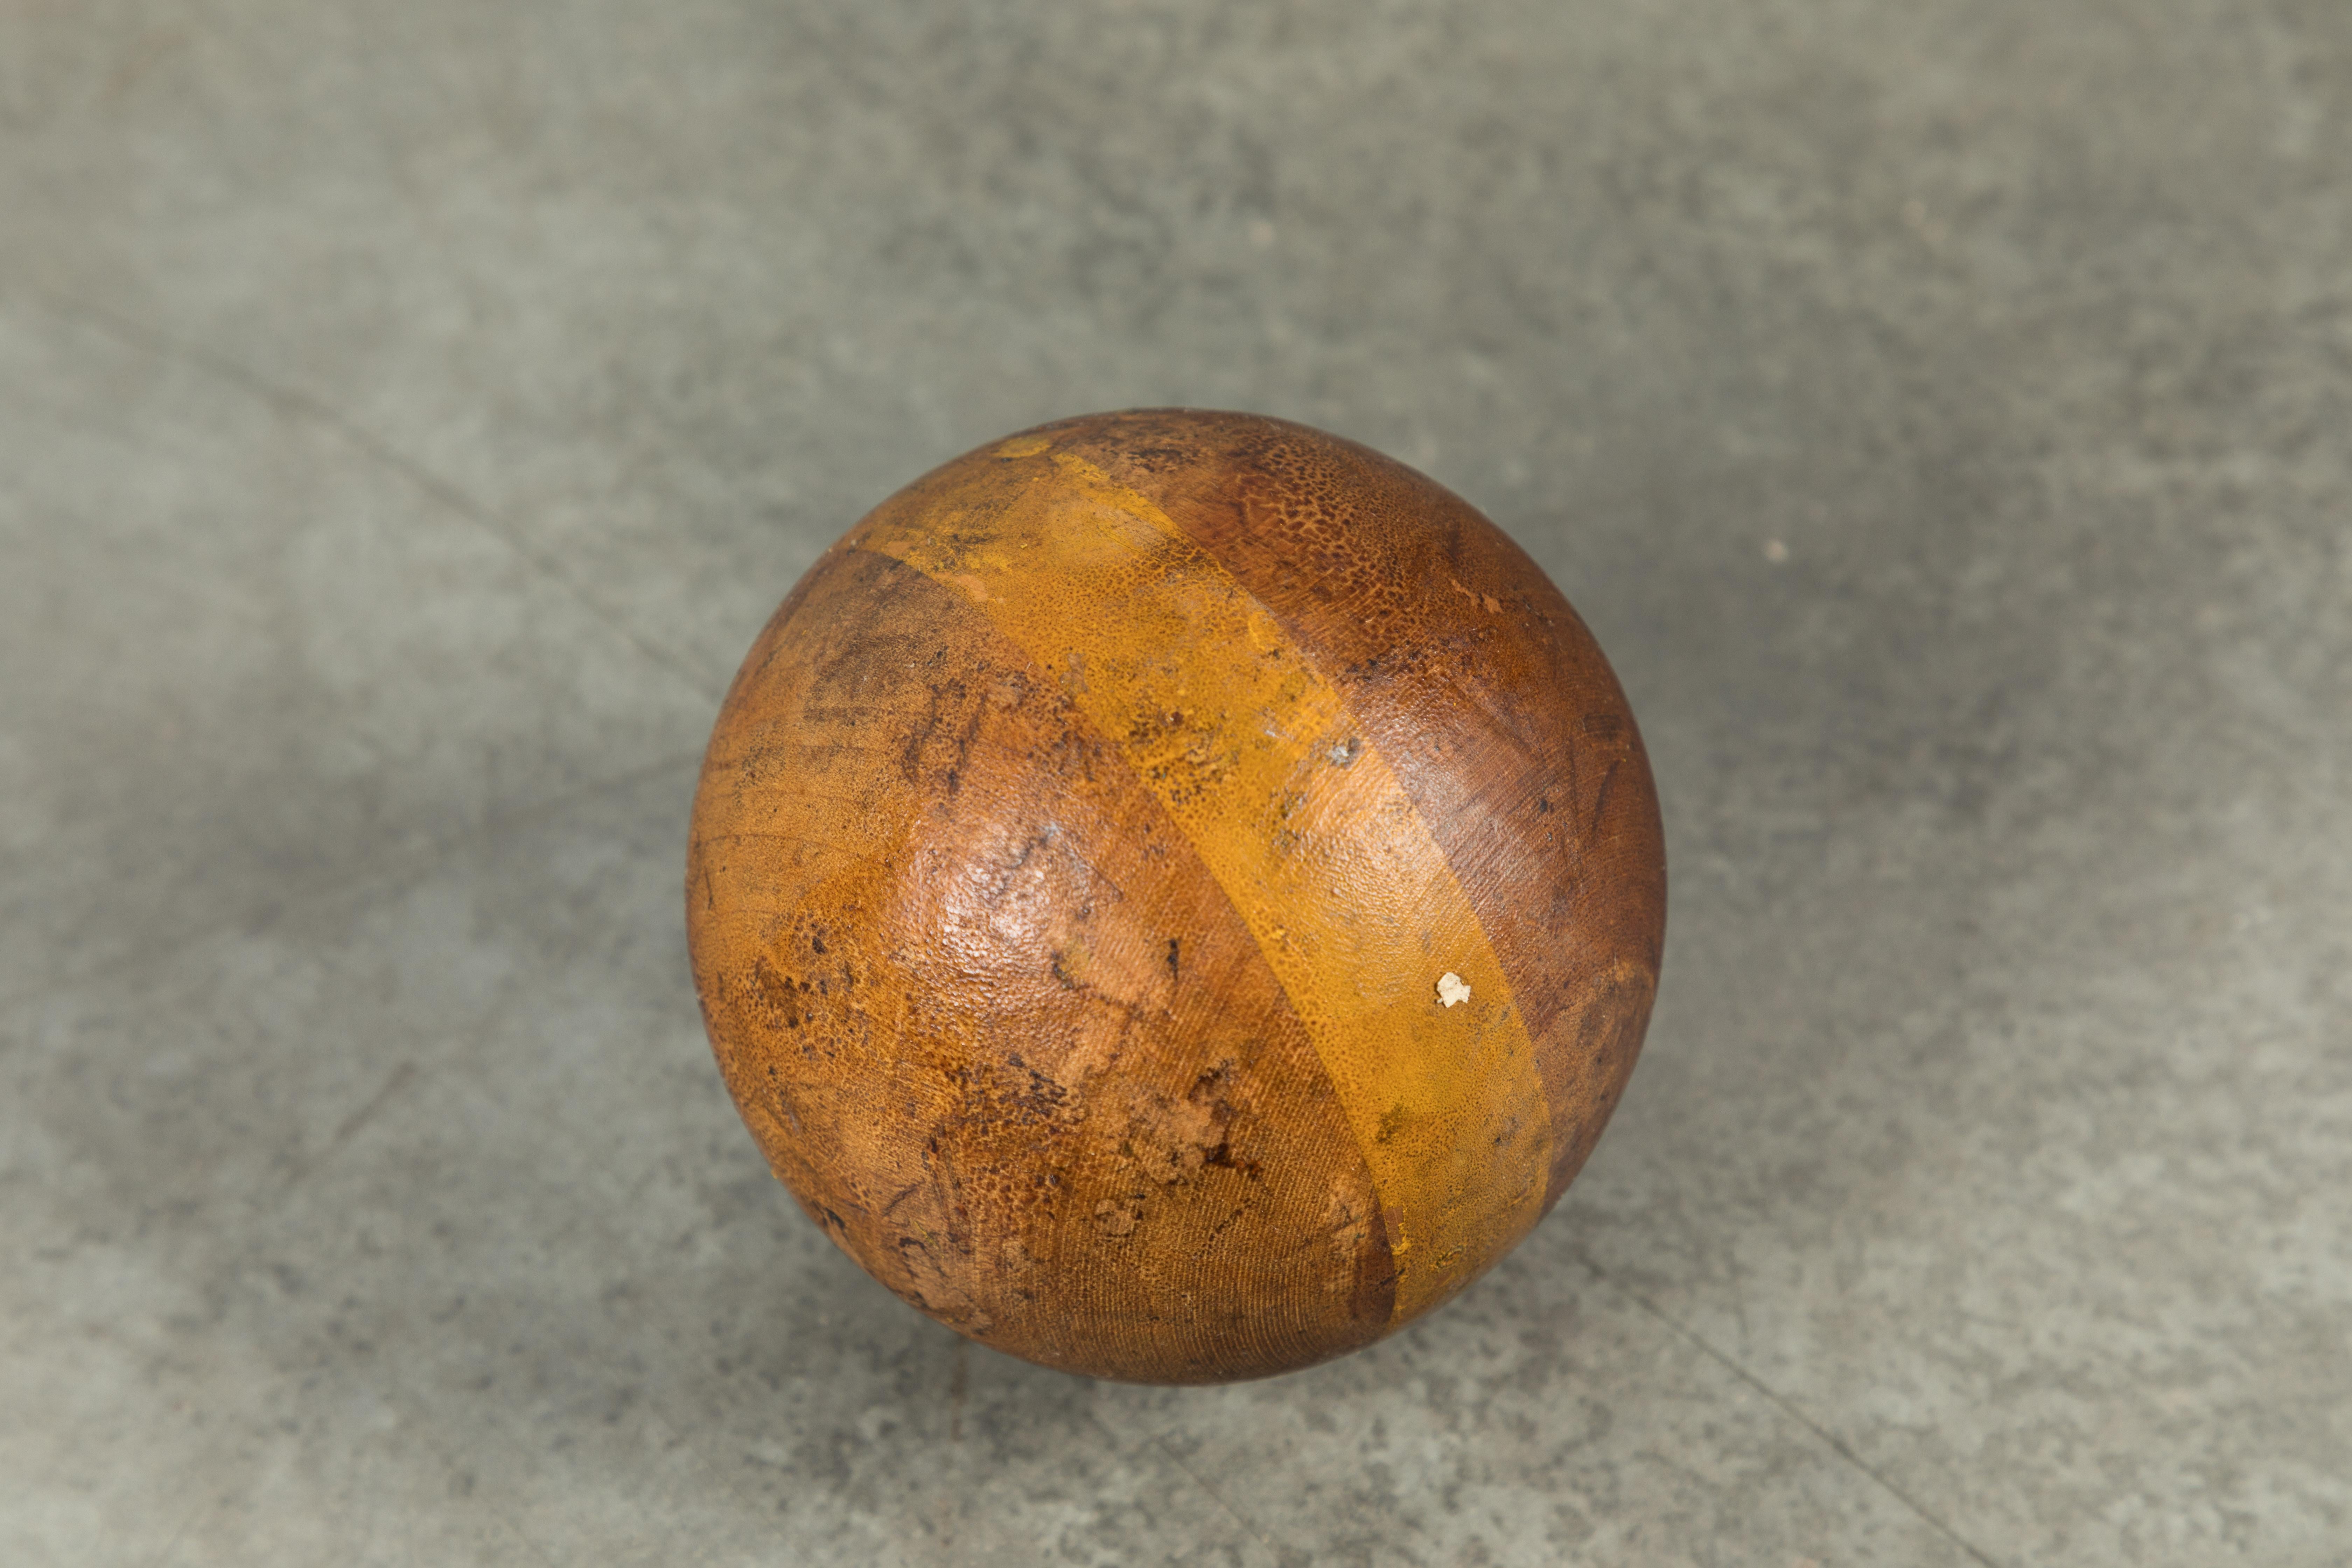 Wood Lawn Bowling Game Original Caddy and Bowling Balls, circa 1900 For Sale 1